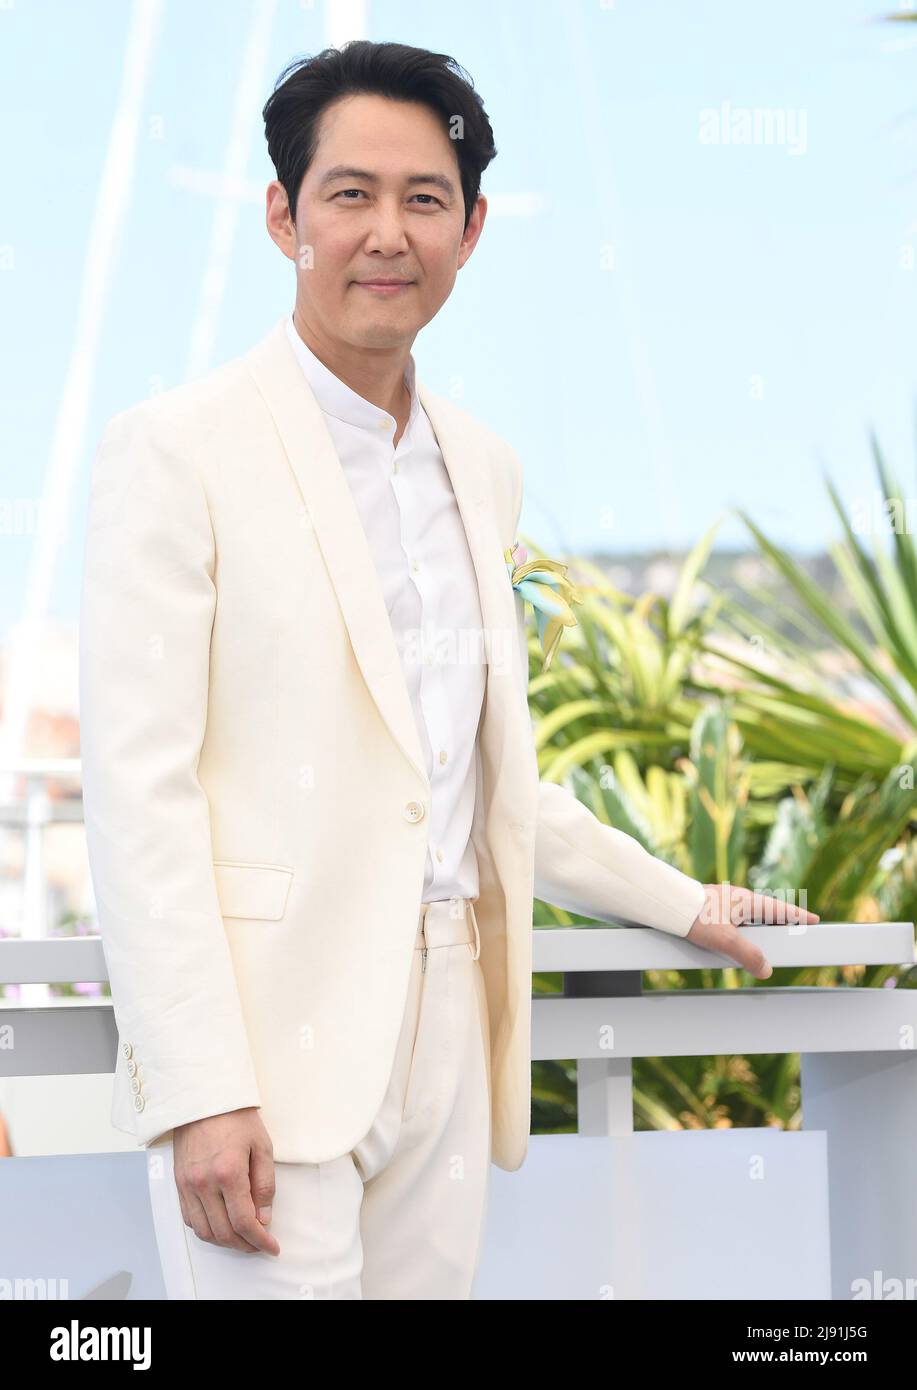 Cannes, France. 19th May, 2022. South Korean actor Lee Jung-Jae attends the photo call for The Hunt at Palais des Festivals at the 75th Cannes Film Festival, France on Thursday, May 19, 2022. Photo by Rune Hellestad/ Credit: UPI/Alamy Live News Stock Photo